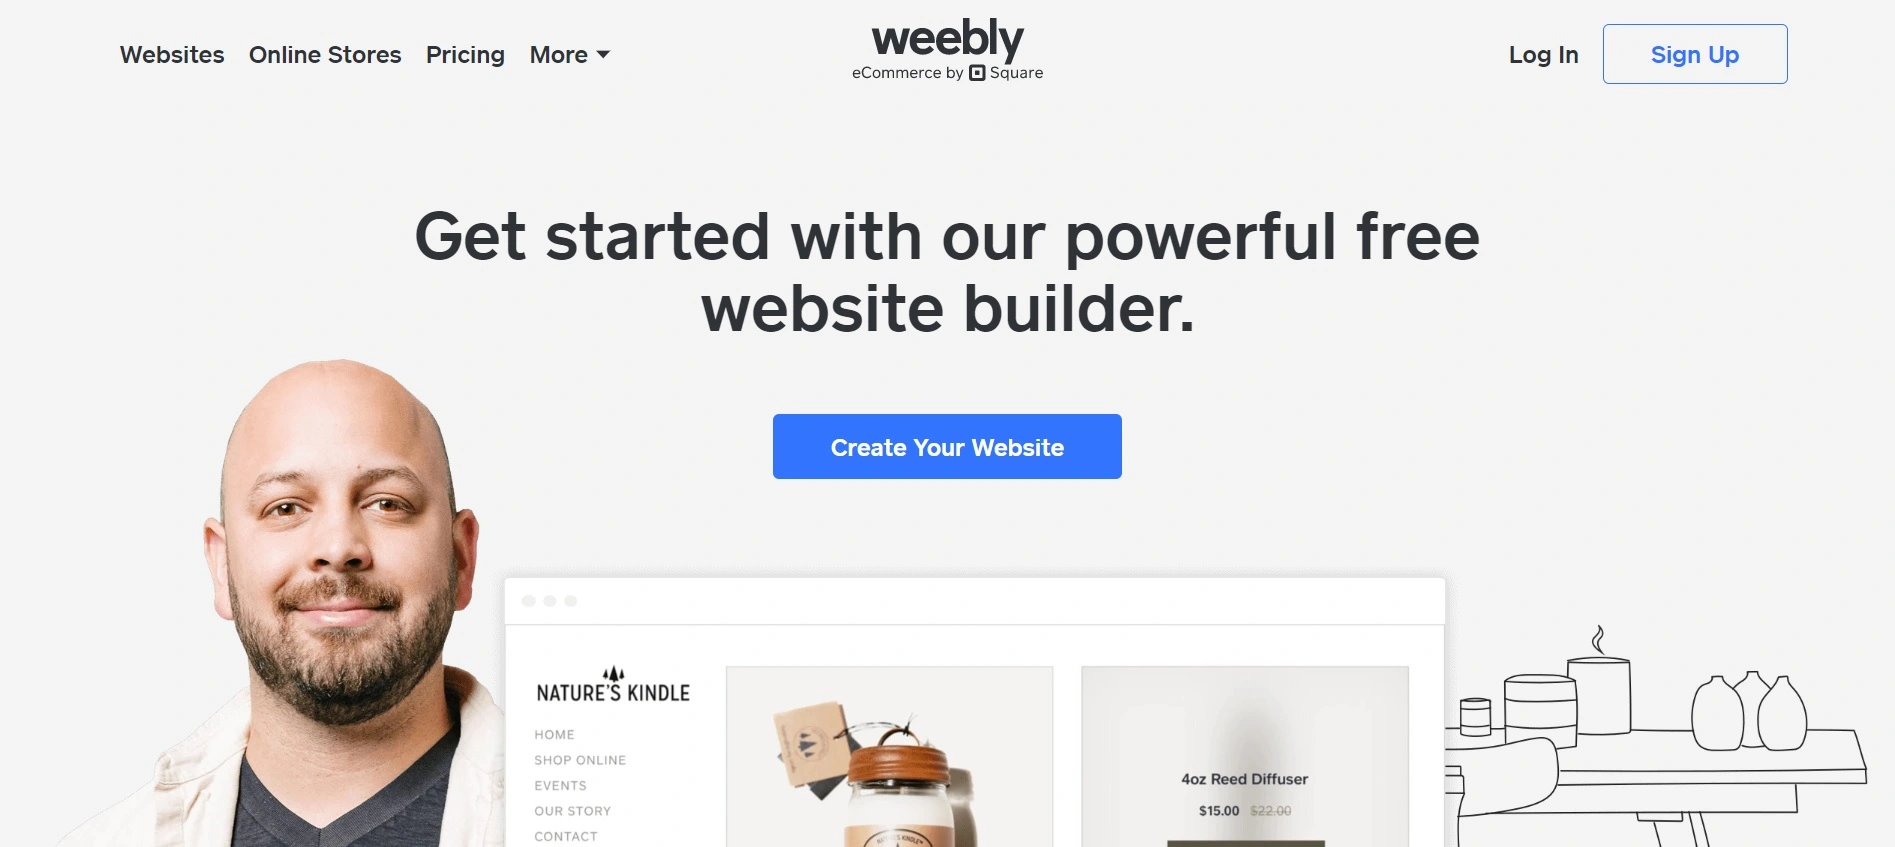 weebly overview